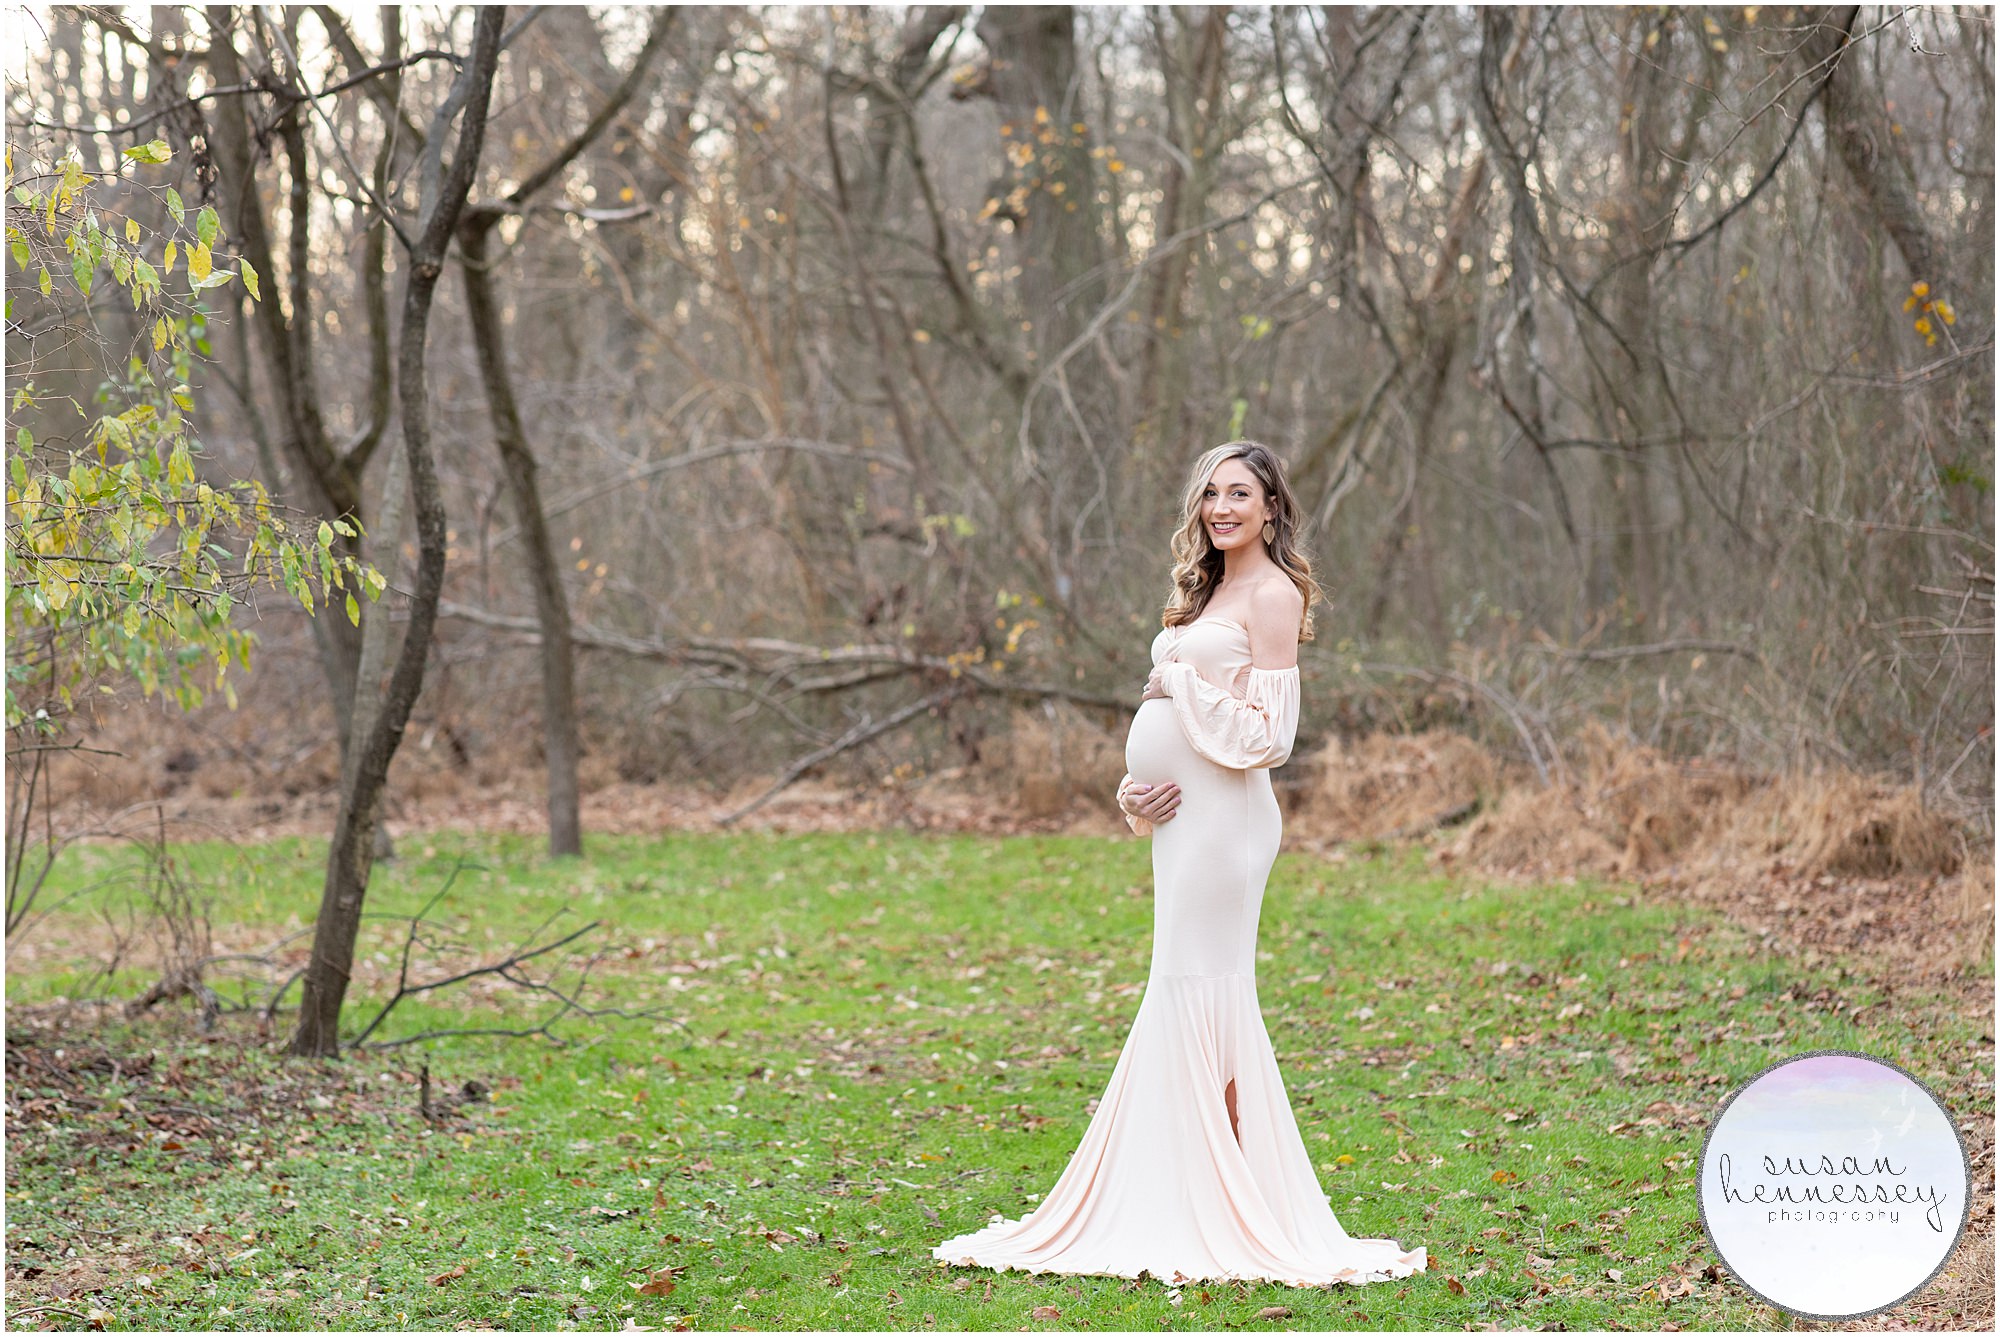 Susan Hennessey Photography is a Moorestown based photographer who offers a bump to baby collection for parents looking for a maternity and newborn session.